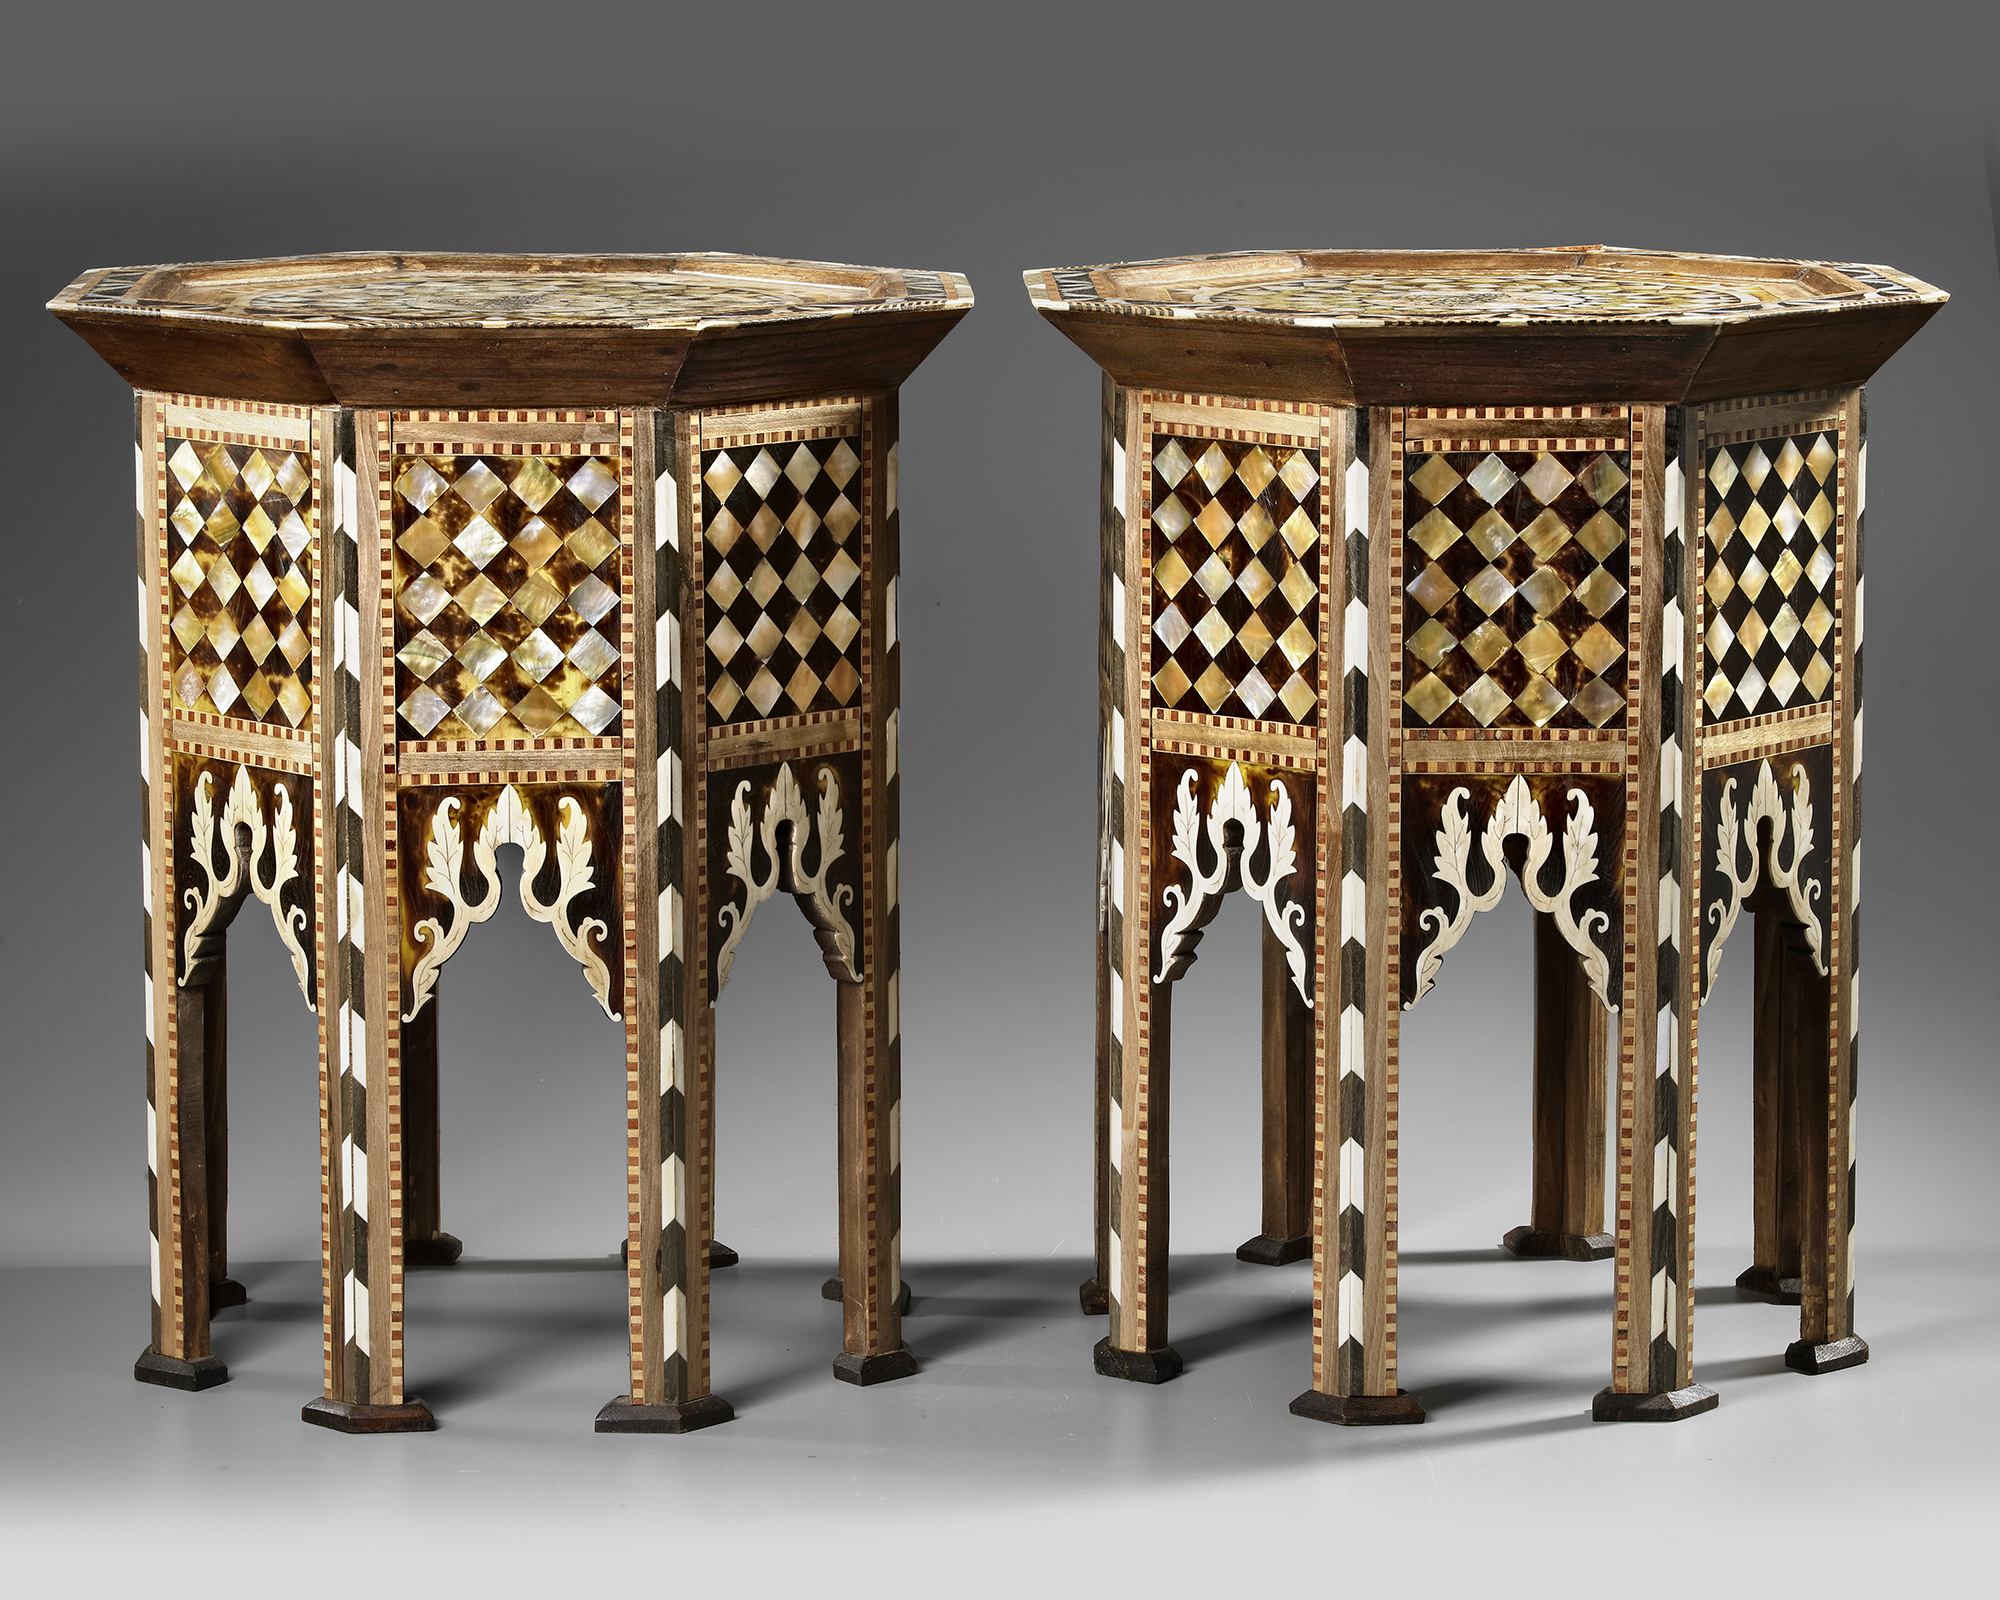 A PAIR OF OTTOMAN MOTHER OF PEARL AND TORTOISESHELL INLAID TABLES, EARLY 20TH CENTURY - Image 3 of 3